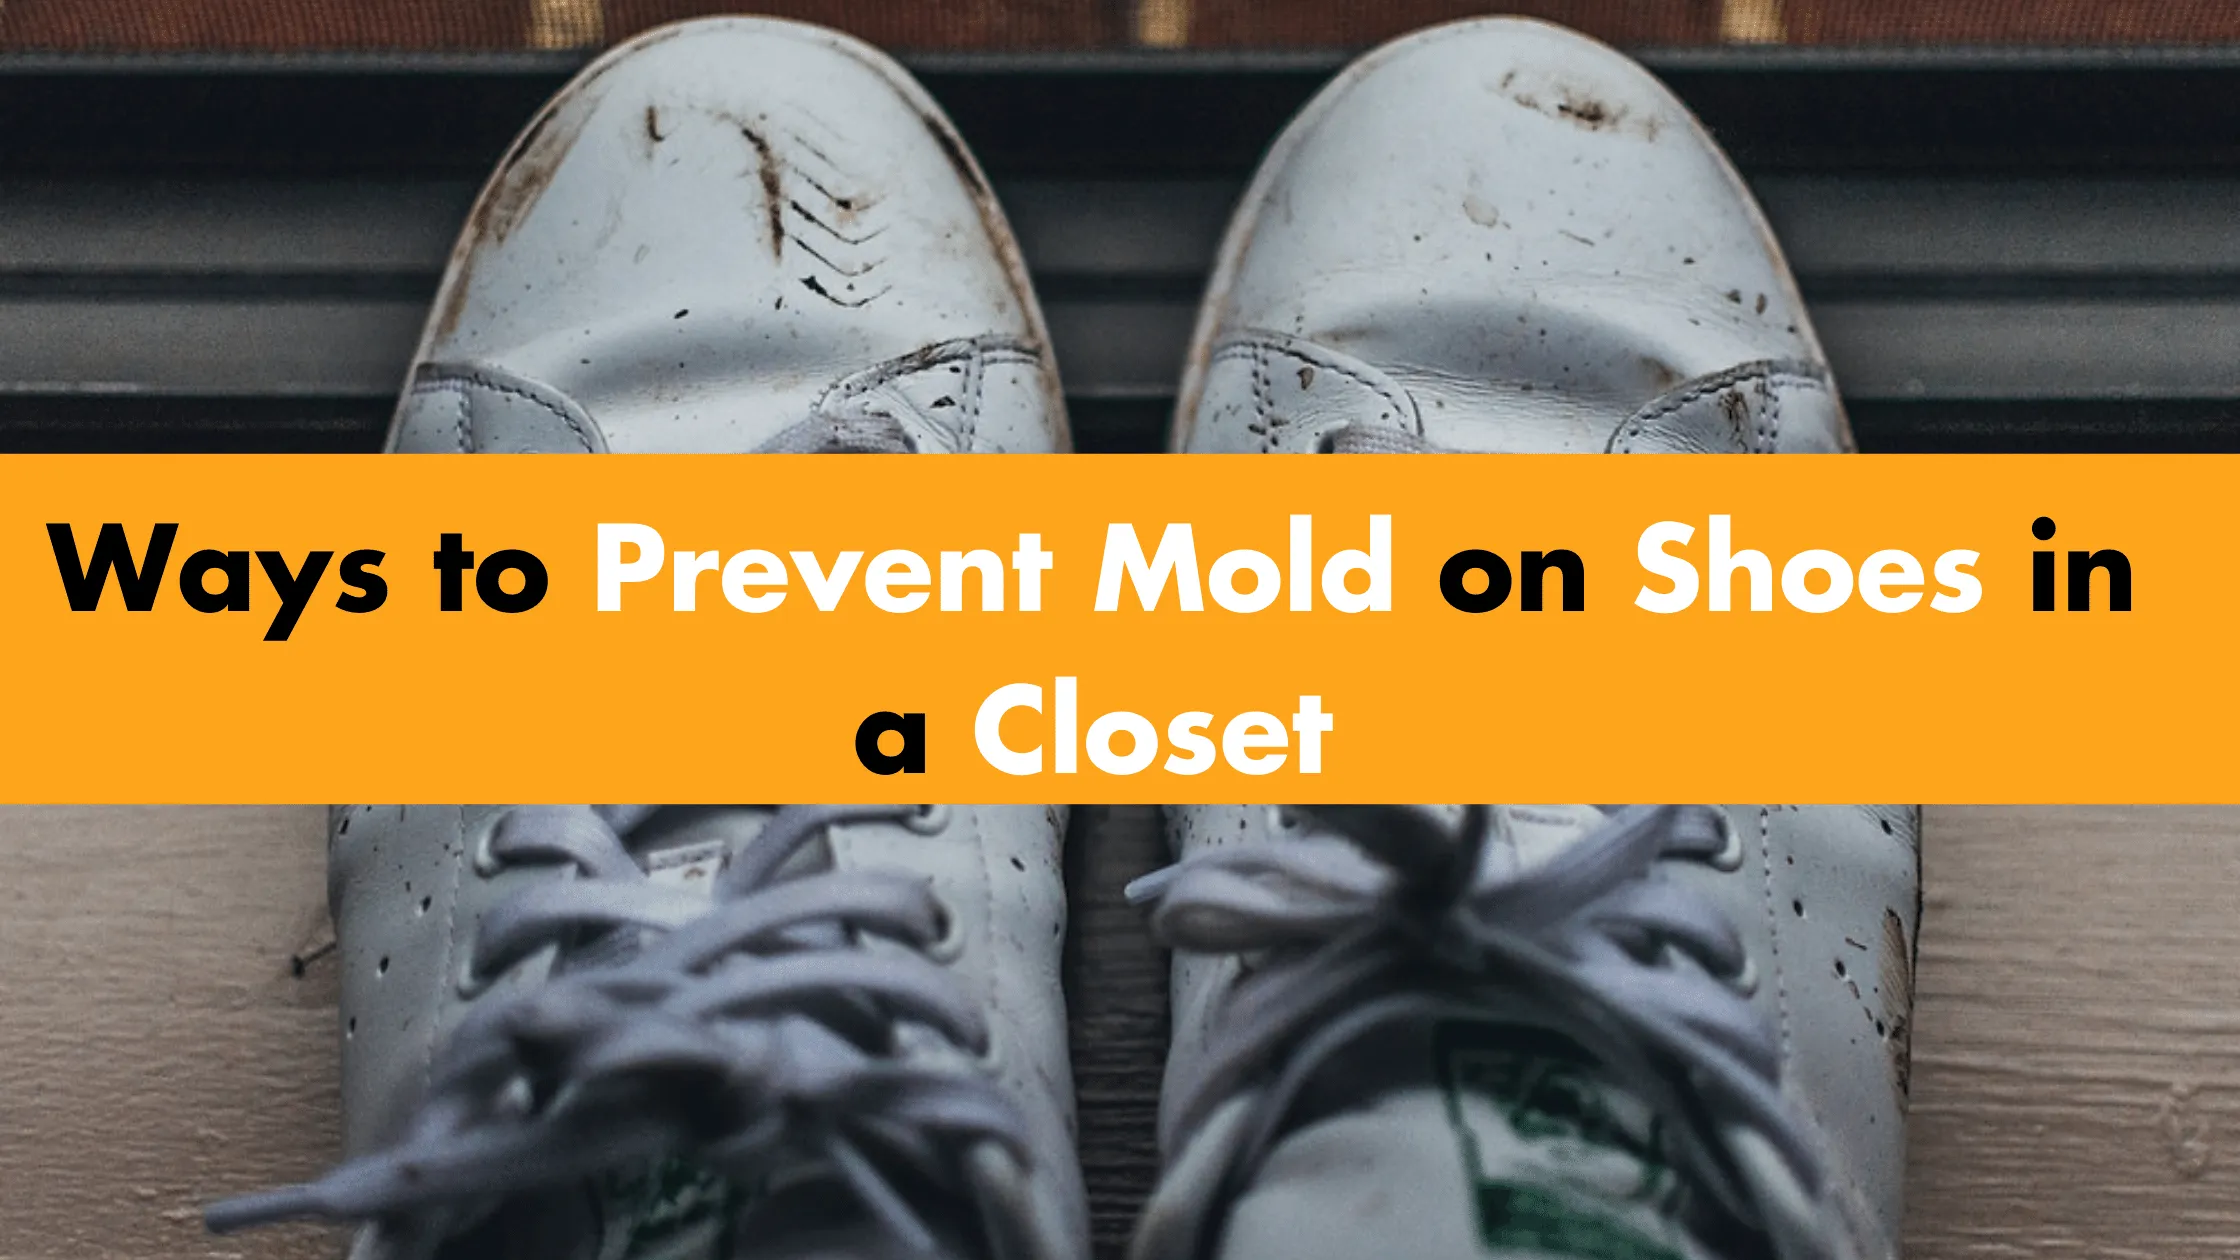 Ways to Prevent Mold on Shoes in a Closet